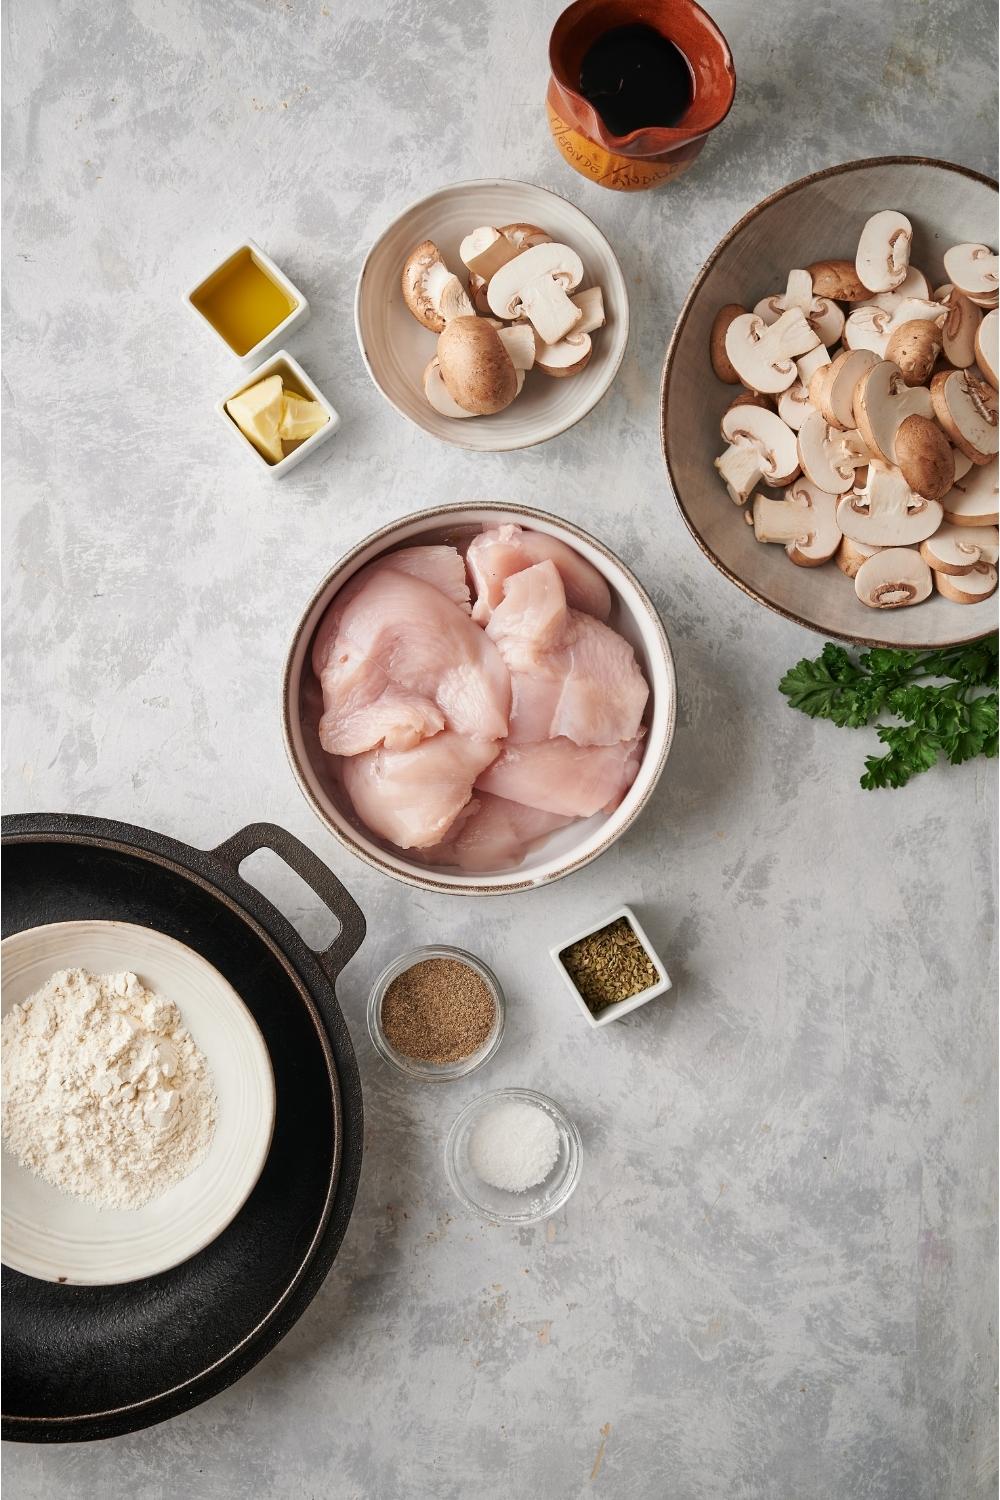 A variety of ingredients for chicken marsala including bowls of raw chicken, sliced mushrooms, salt, pepper, butter, and a flour mixture, all on a grey countertop.